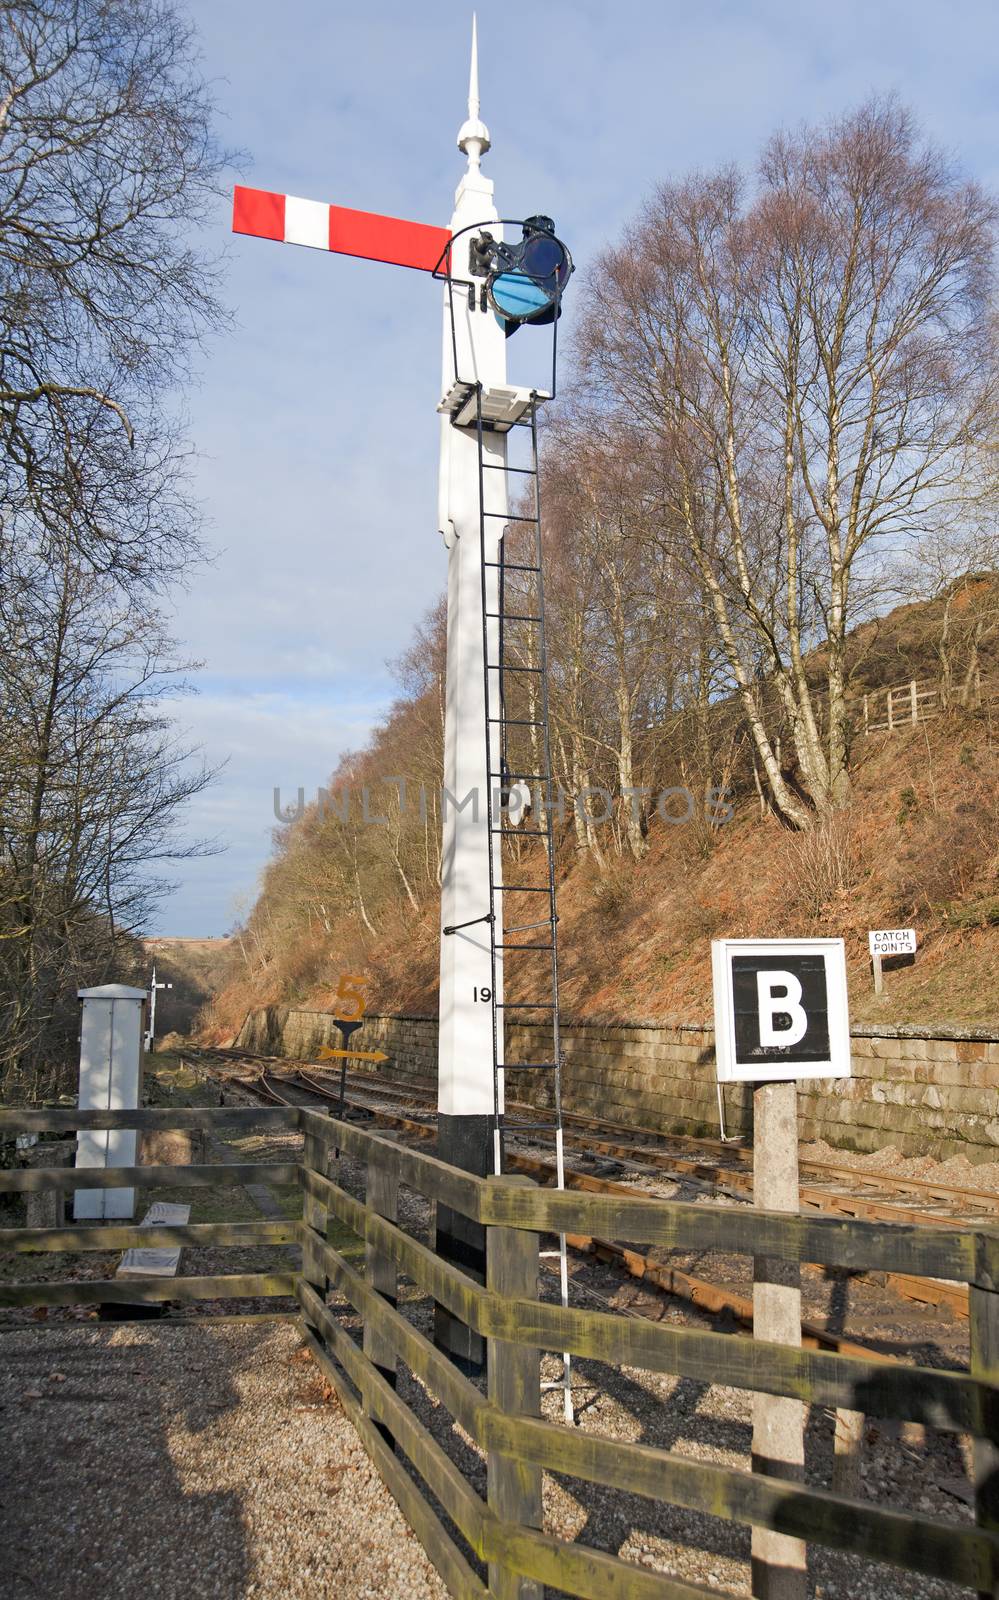 Old traditional railway signal at a points junction in the countryside